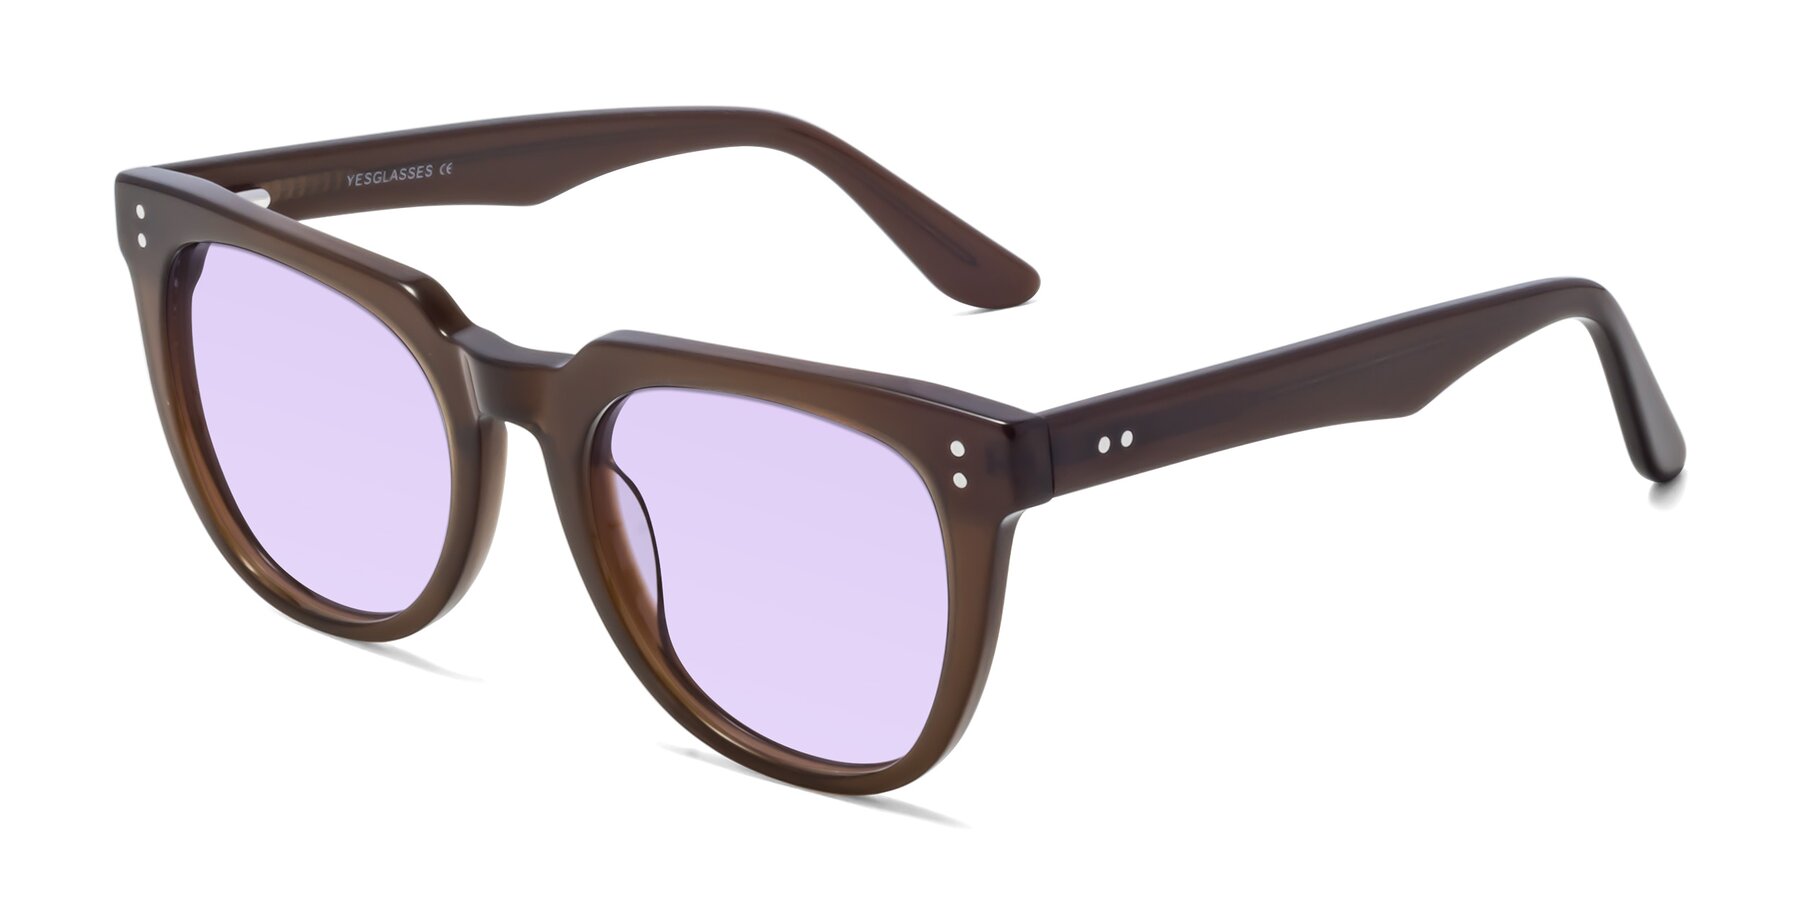 Angle of Graceful in Coffee with Light Purple Tinted Lenses